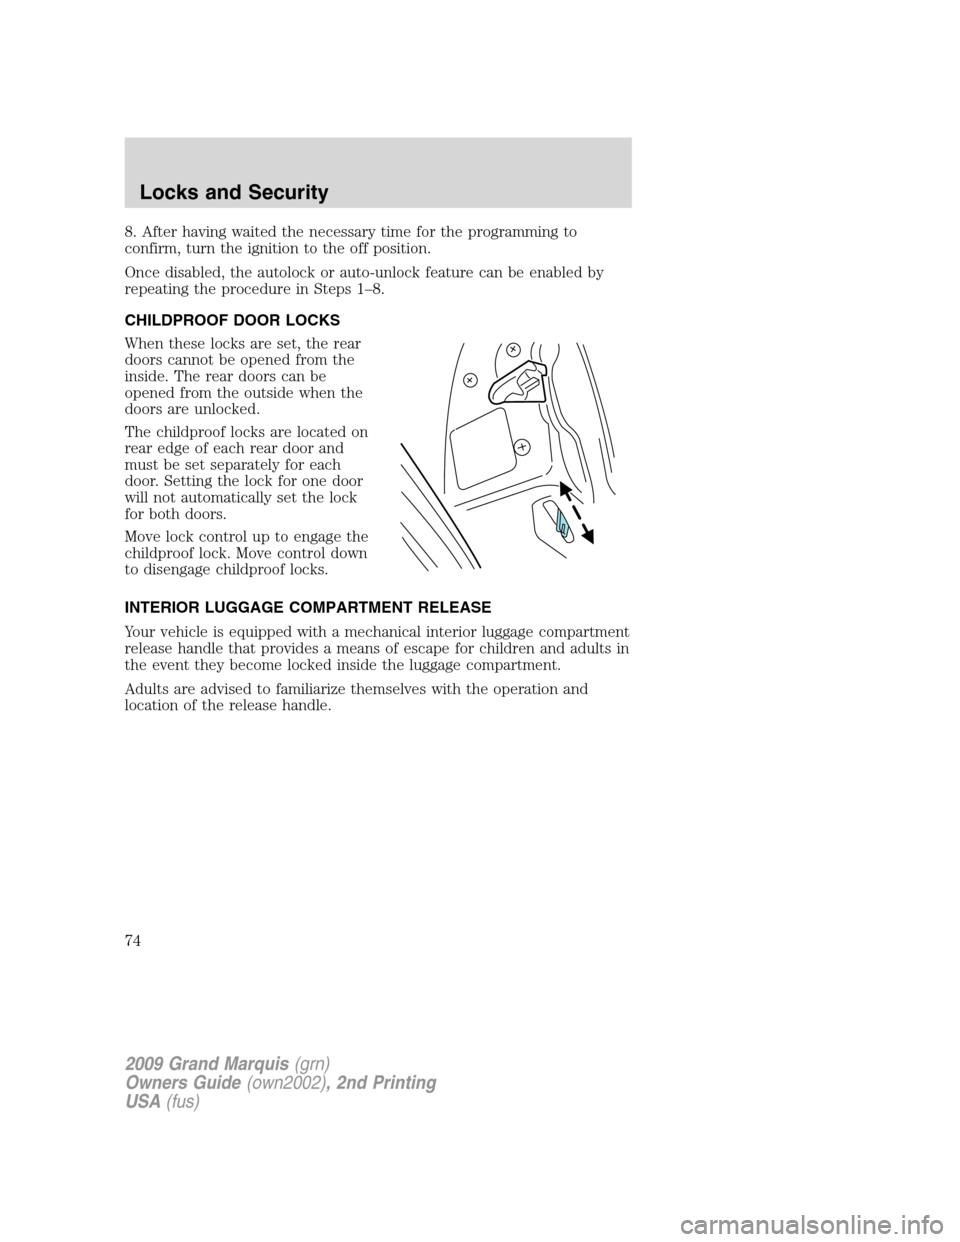 Mercury Grand Marquis 2009  Owners Manuals 8. After having waited the necessary time for the programming to
confirm, turn the ignition to the off position.
Once disabled, the autolock or auto-unlock feature can be enabled by
repeating the proc